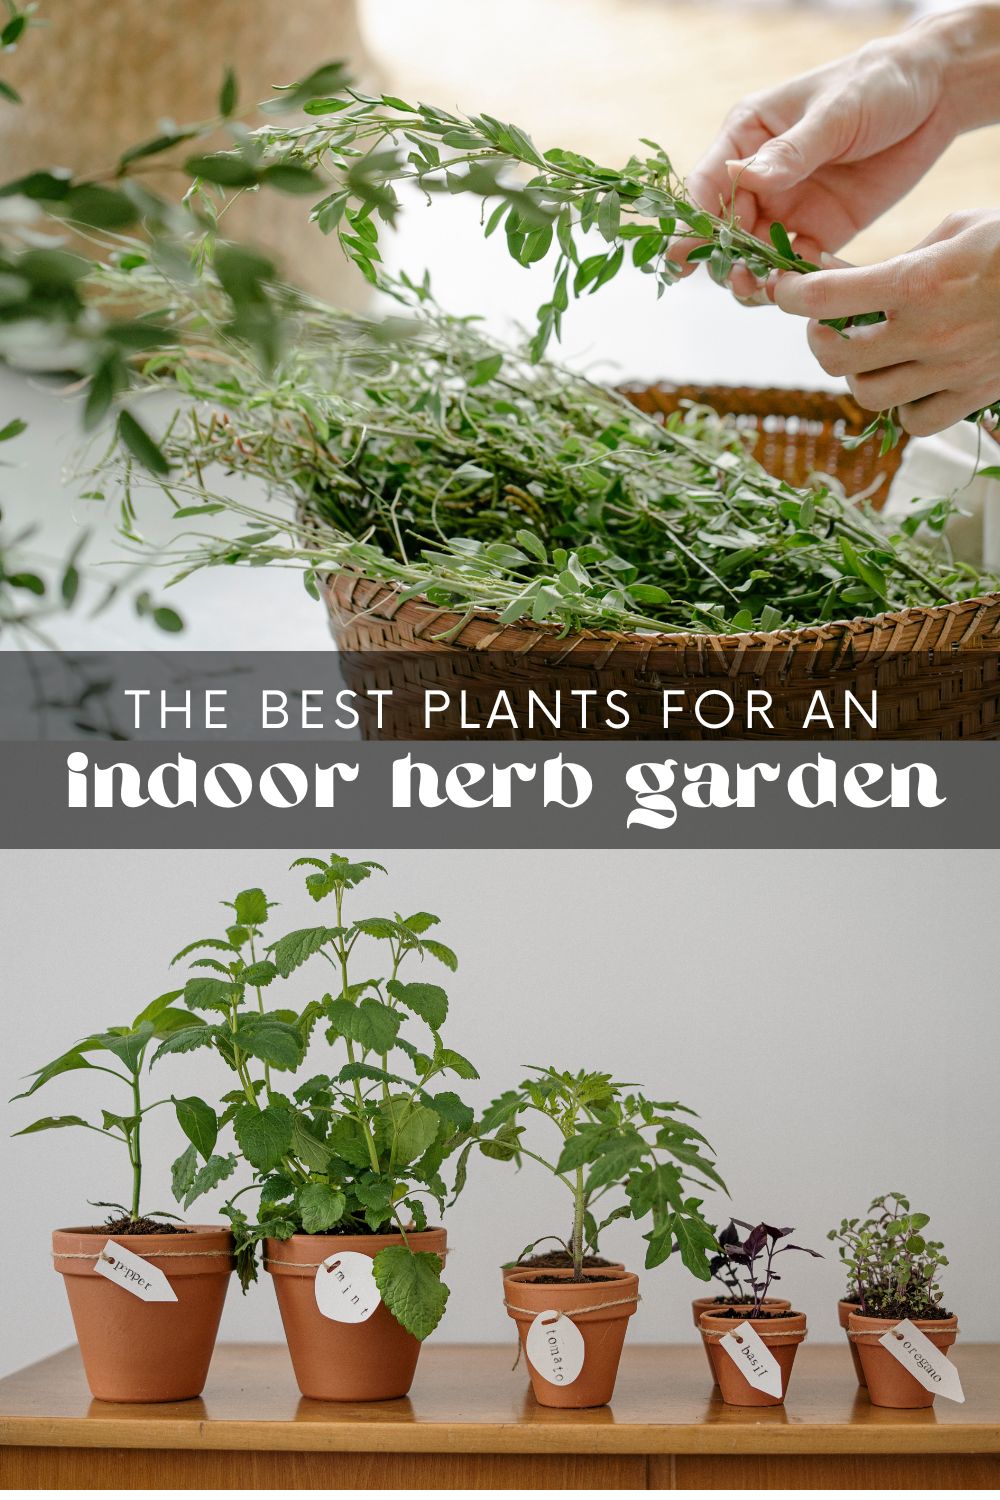 Don't worry if you lack outdoor space or a green thumb – plenty of herbs thrive indoors! Not only do these fresh herbs provide delicious flavor for your cooking, but growing herbs indoors adds freshness and life to your home. Many plants thrive in an indoor herb garden, so you can easily choose the best ones for your space!